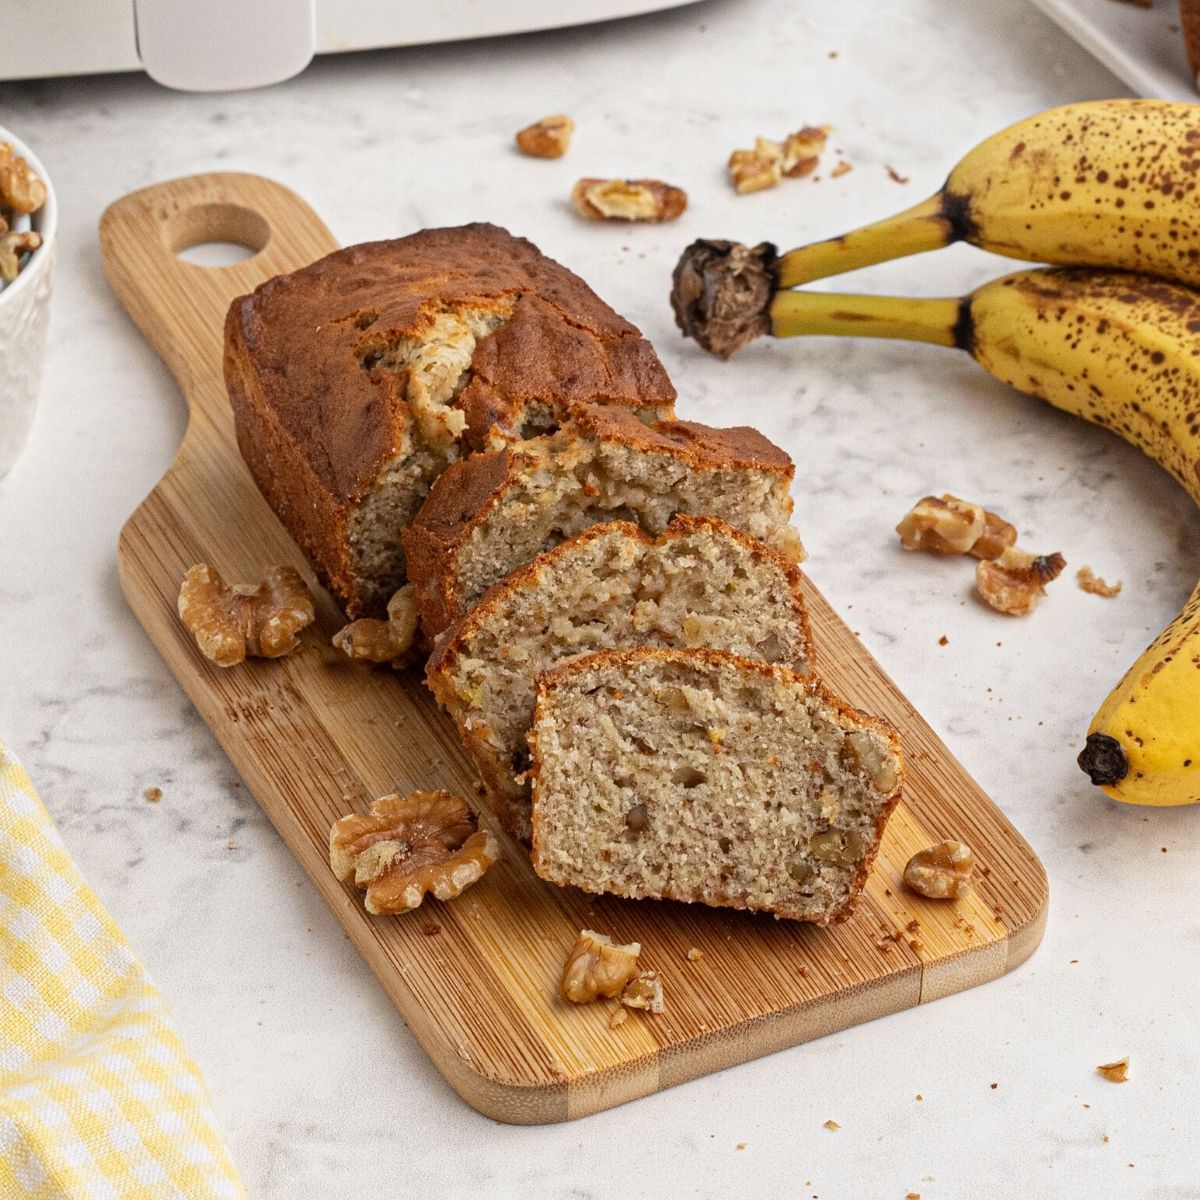 sliced loaf of banana nut bread in front of an air fryer next to bananas and scattered walnuts